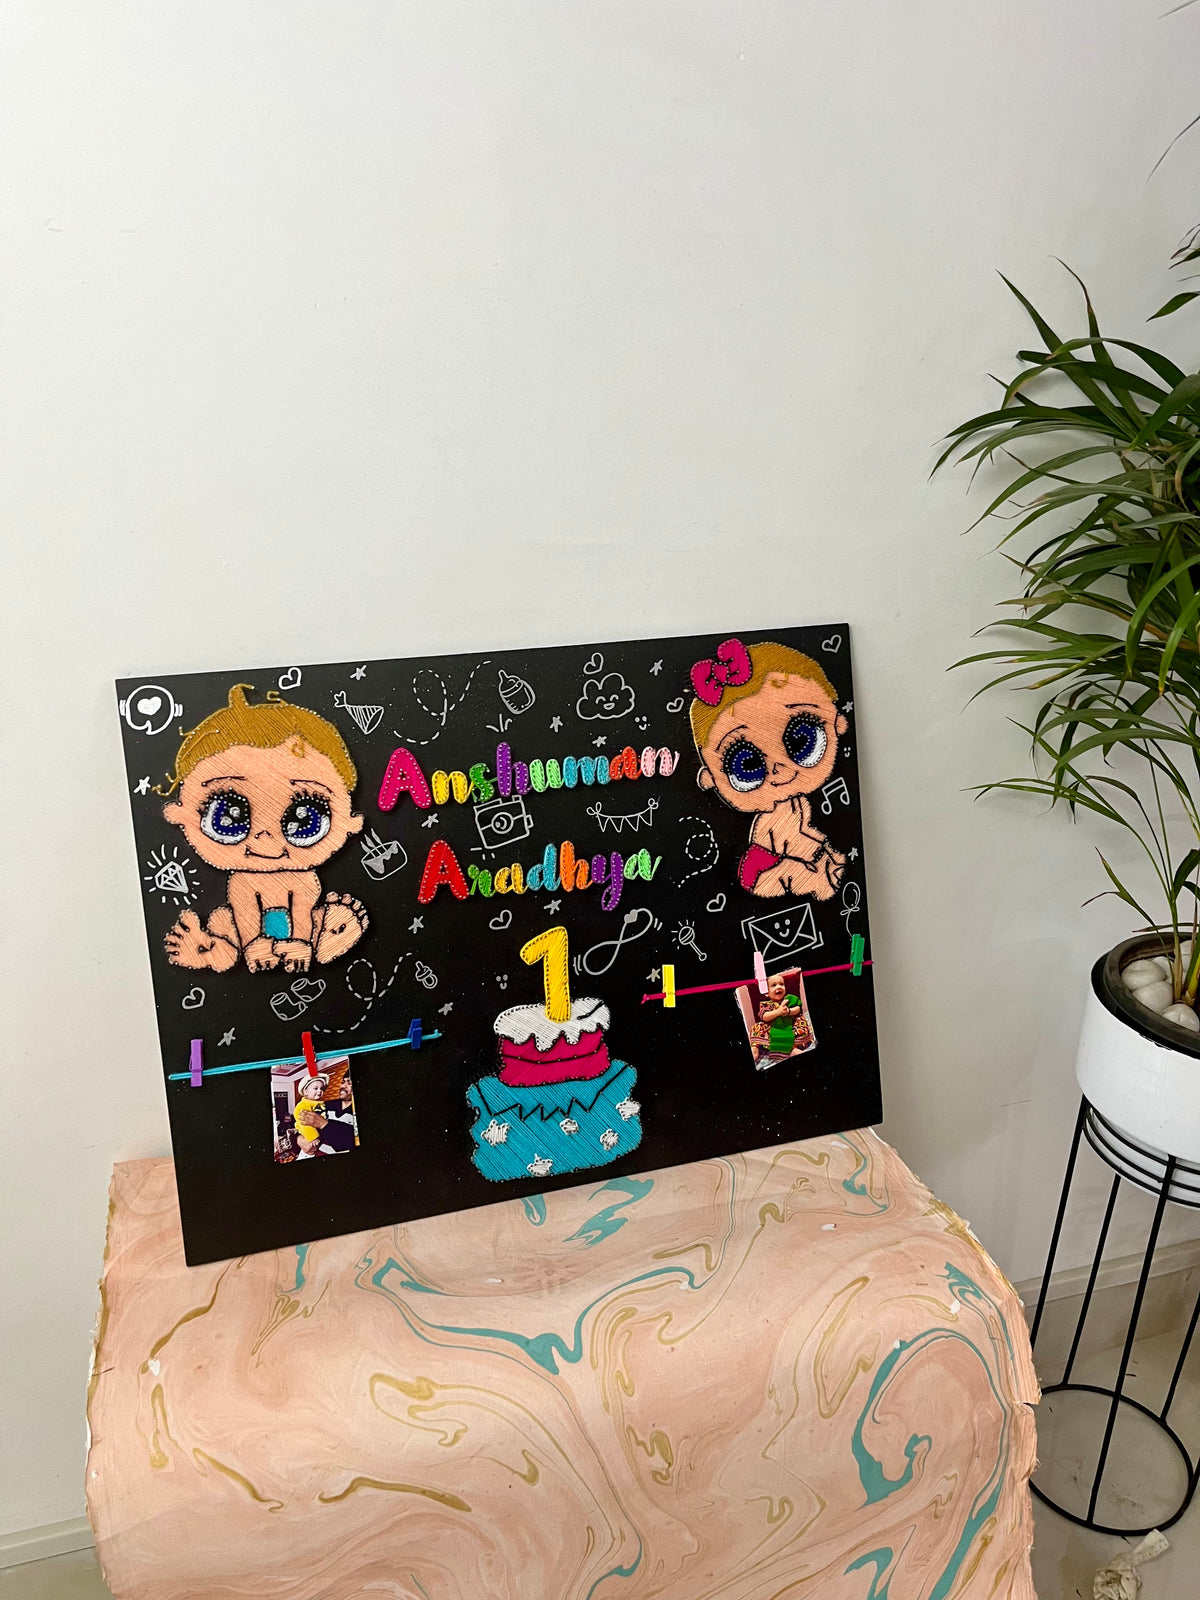 "doubly blessed: twin's birthday string art"